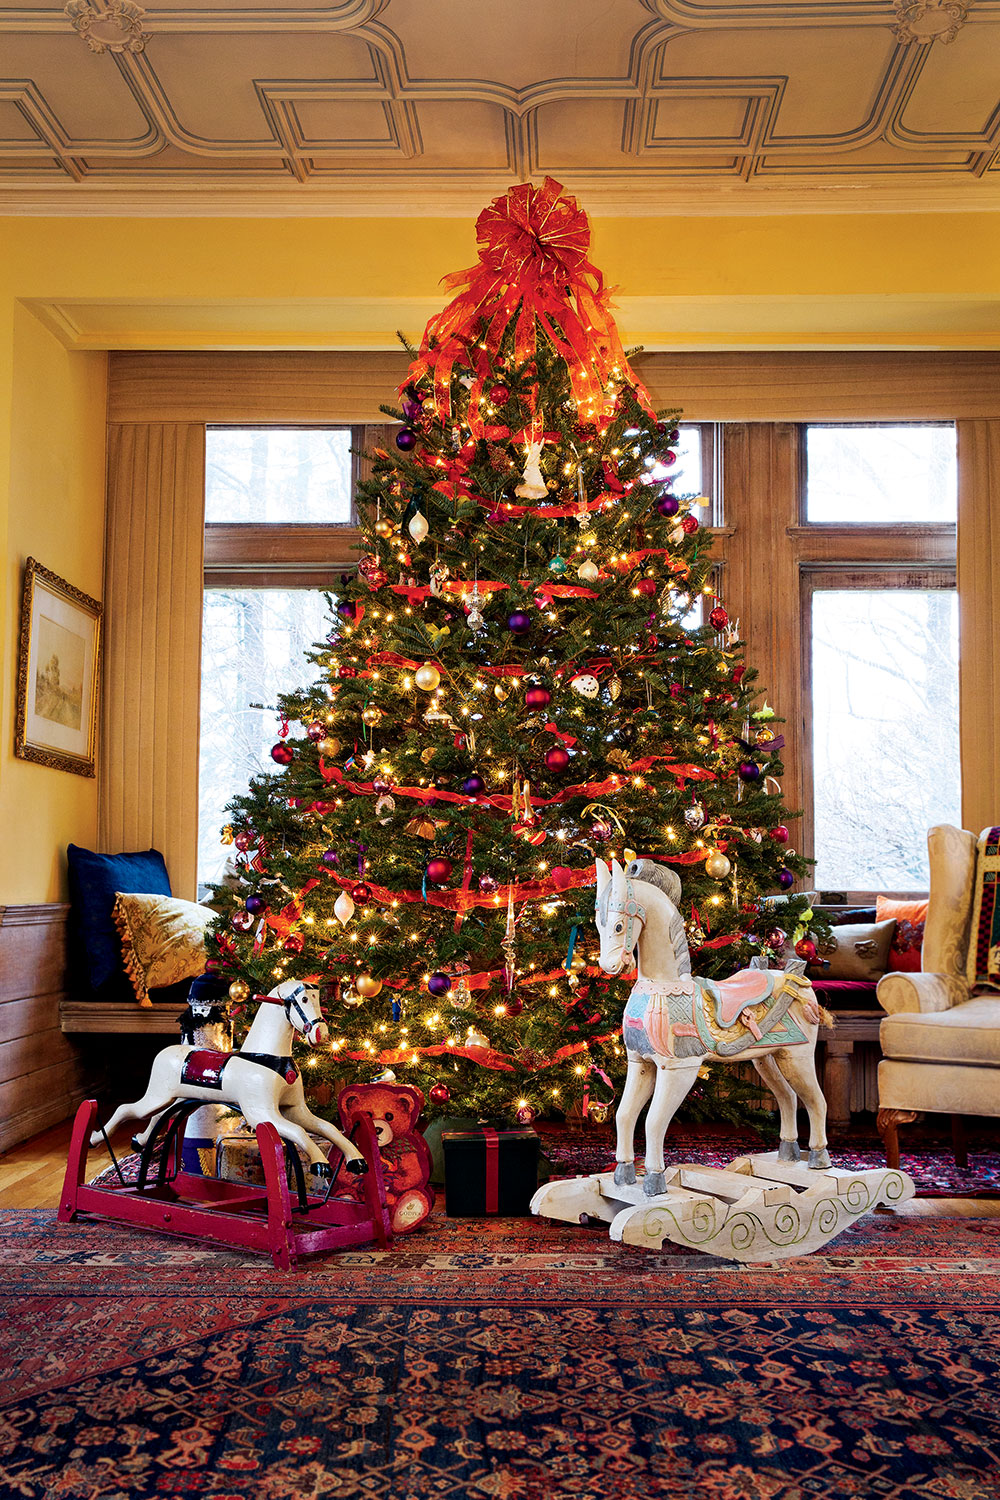 A dazzling tree, decorated by the trio of “Twinkle Girls,” stands tall in the inn’s salon.